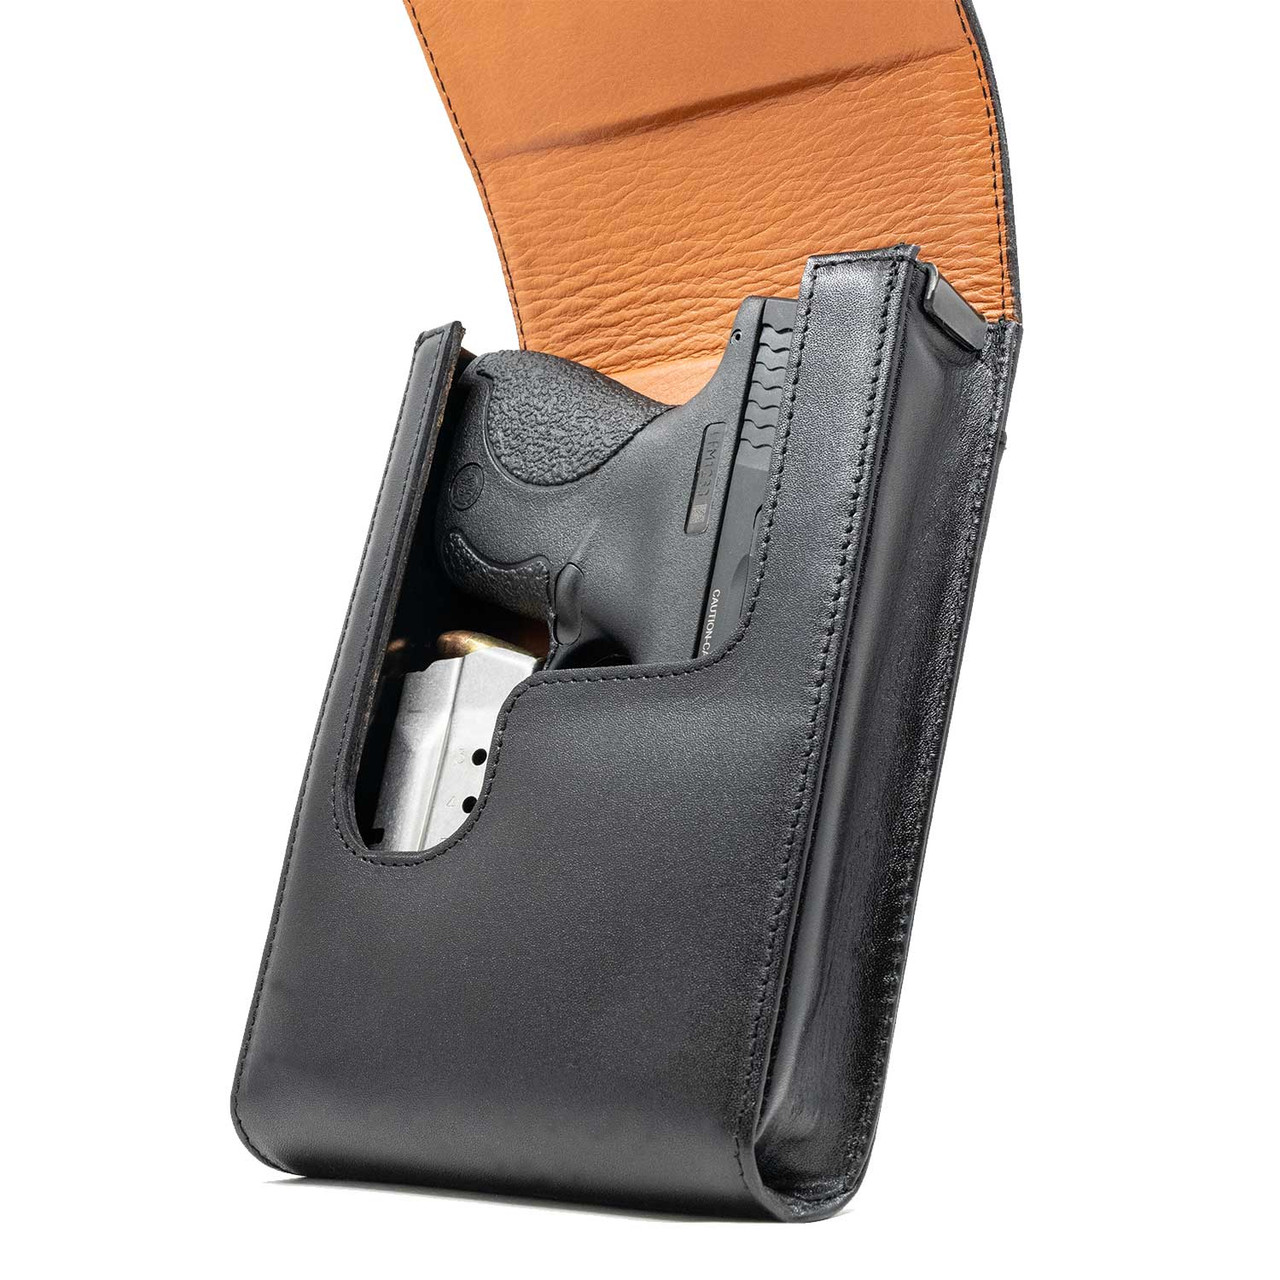 The S&W Equalizer 9mm Xtra Mag Black Leather Holster